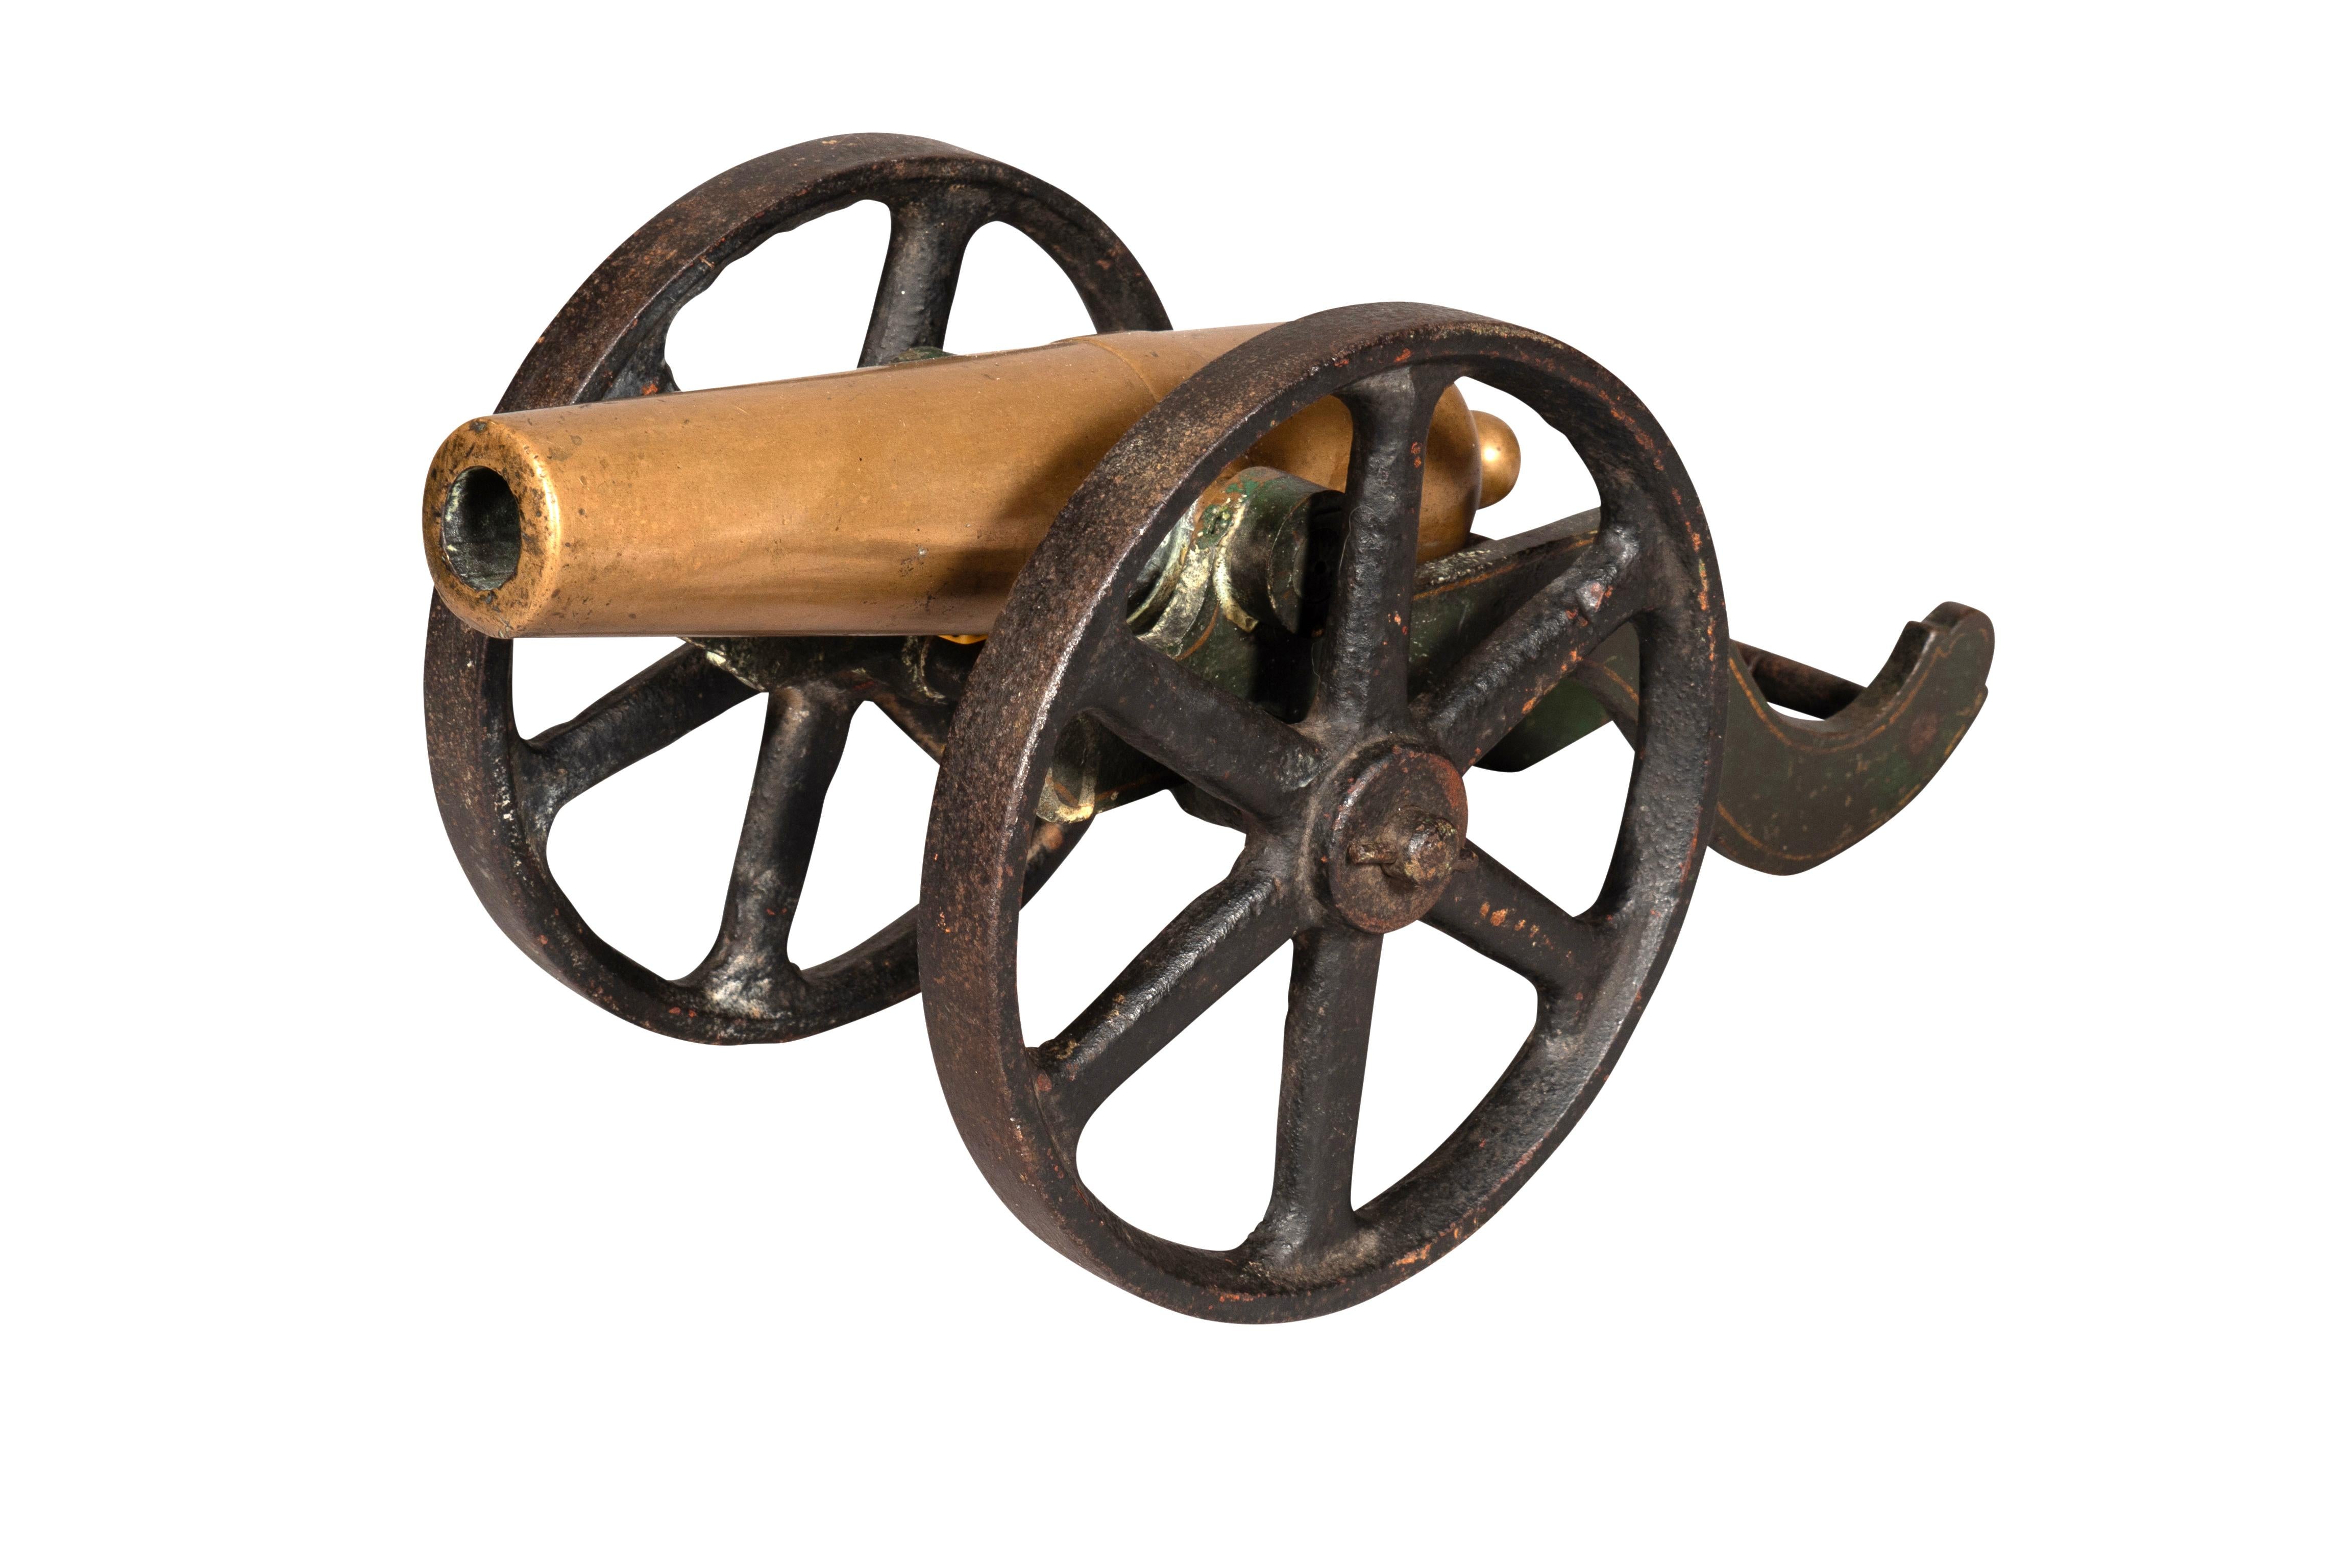 With bronze cannon mounted on a cast iron base with wheel carriage.